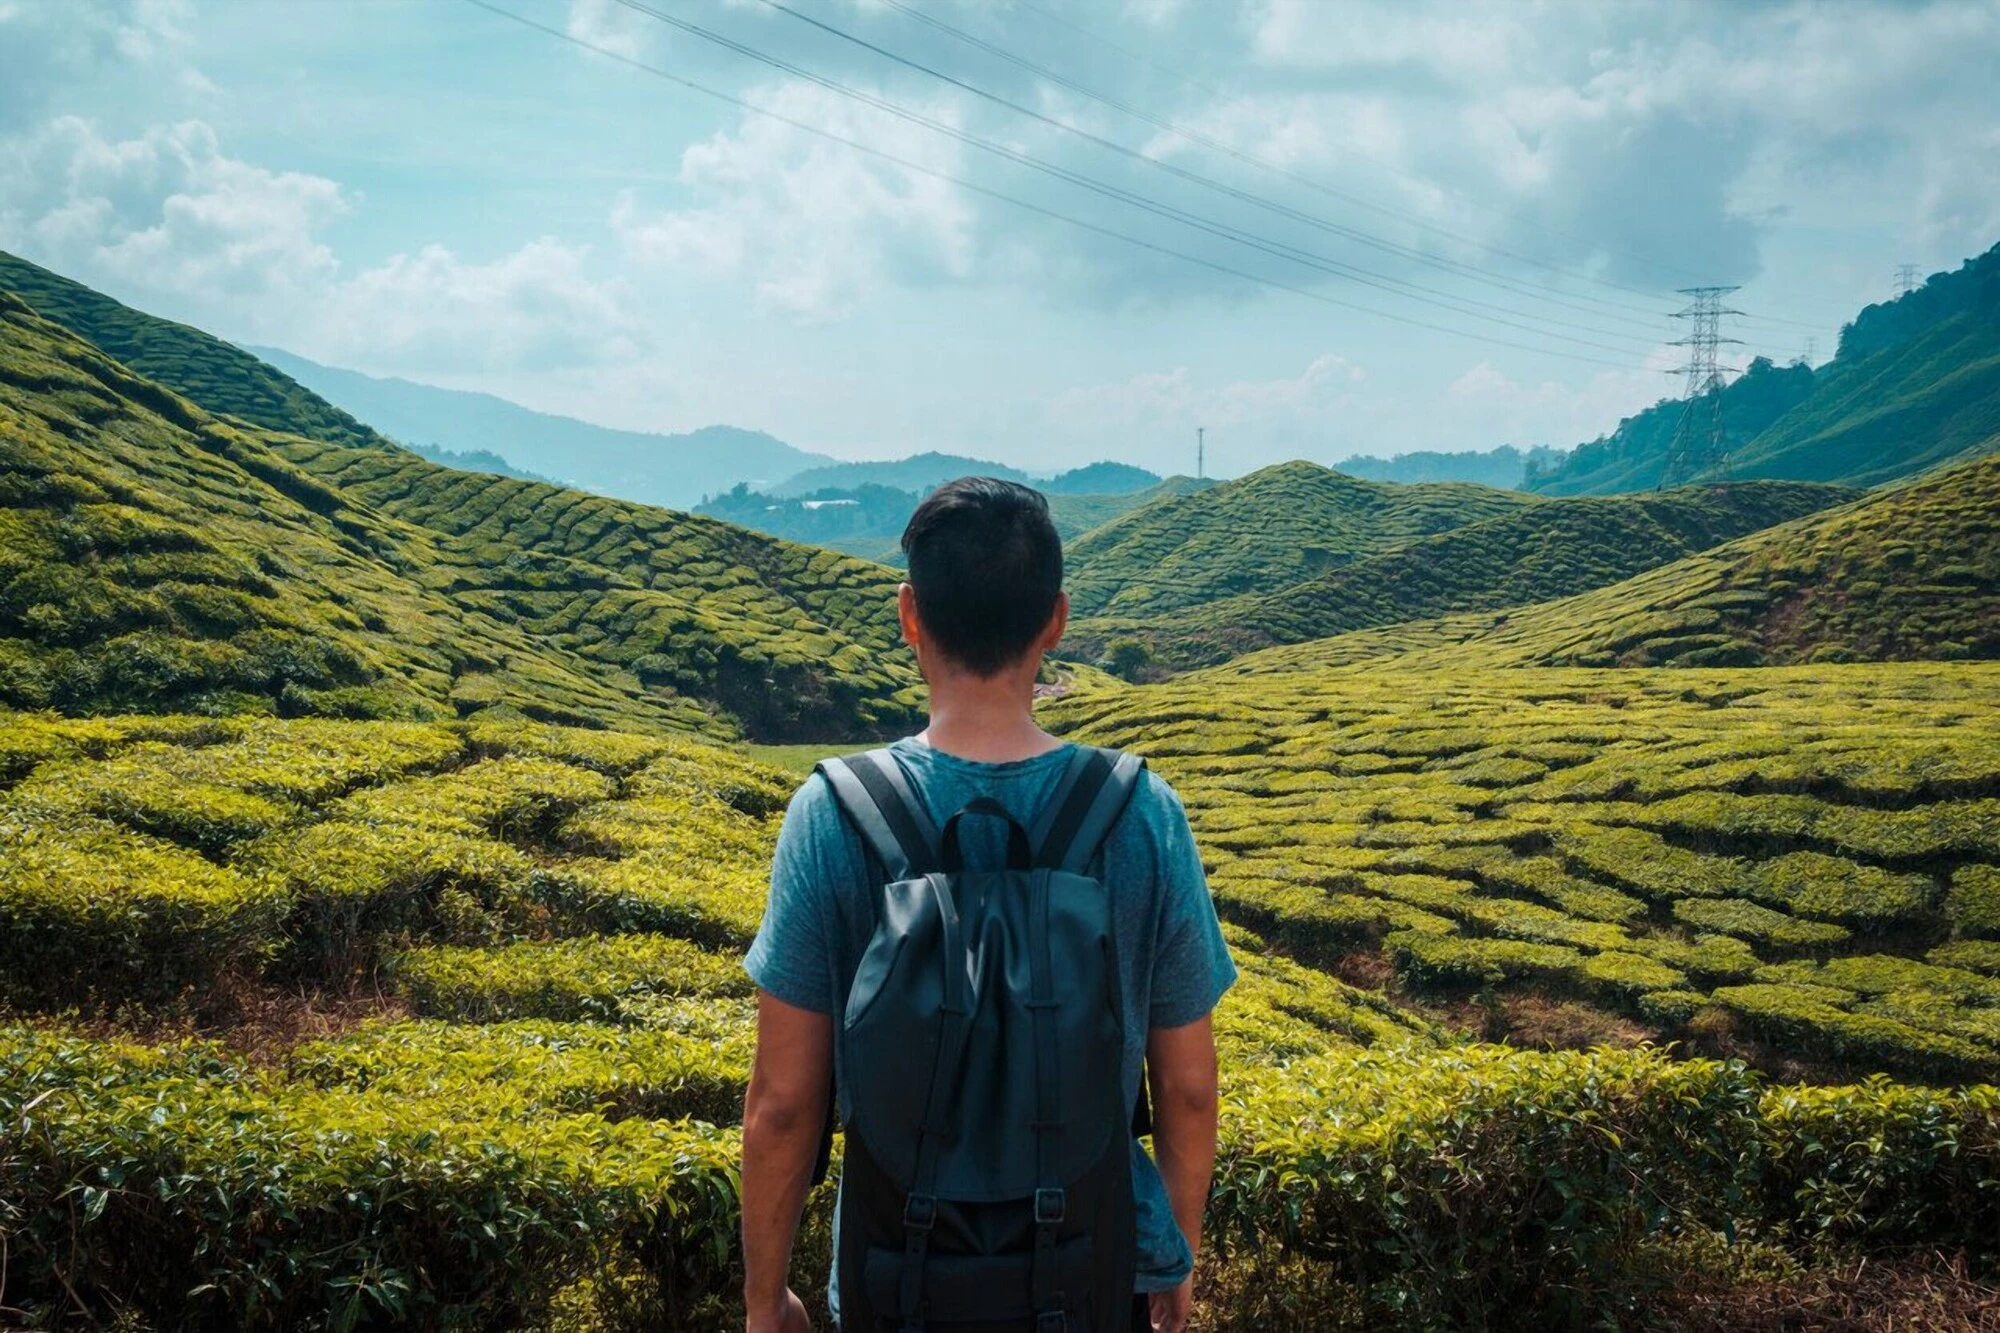 A Complete Hiking Guide to Cameron Highlands, Malaysia - Best Jungle Trails, Hiking Maps, Things to Prepare and More